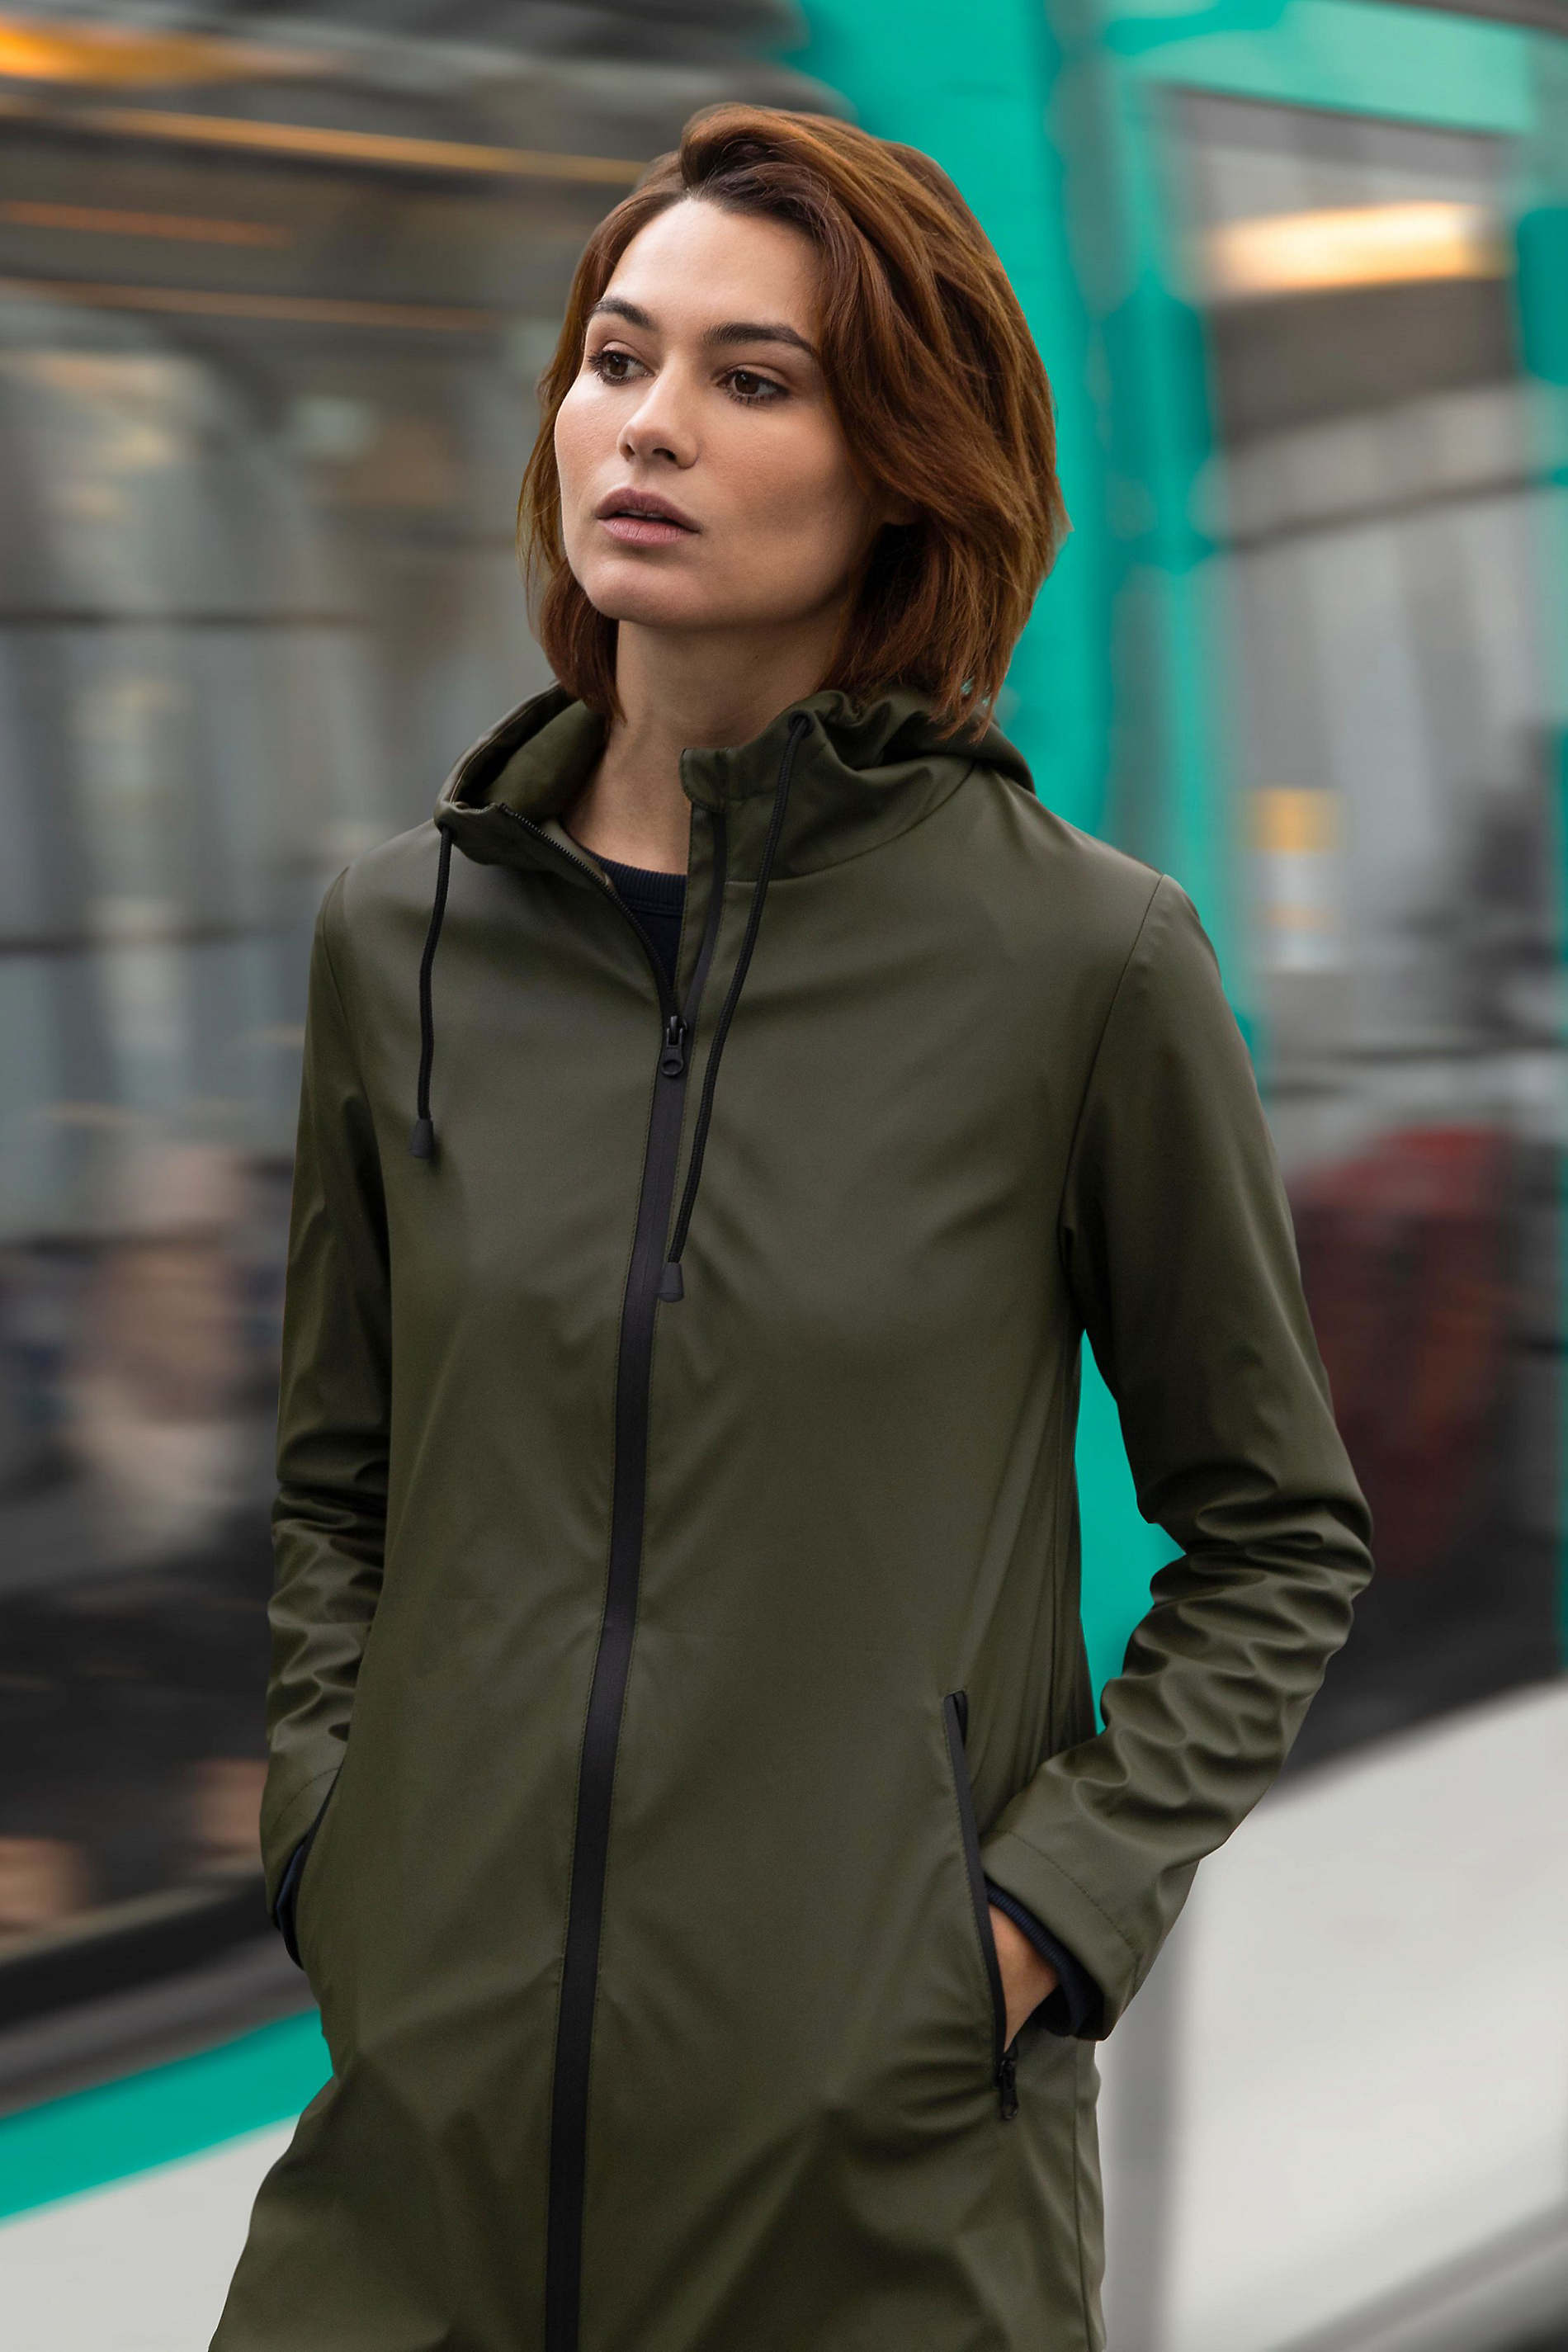 Women's waterproof waxed jacket<p>This revisited waxed jacket is an iconic garment that combines performance and modernity. Its waterproof finishes make it perfectly impermeable and its matt look gives it a modern style.<p> NEOBLU ANTOINE WOMEN